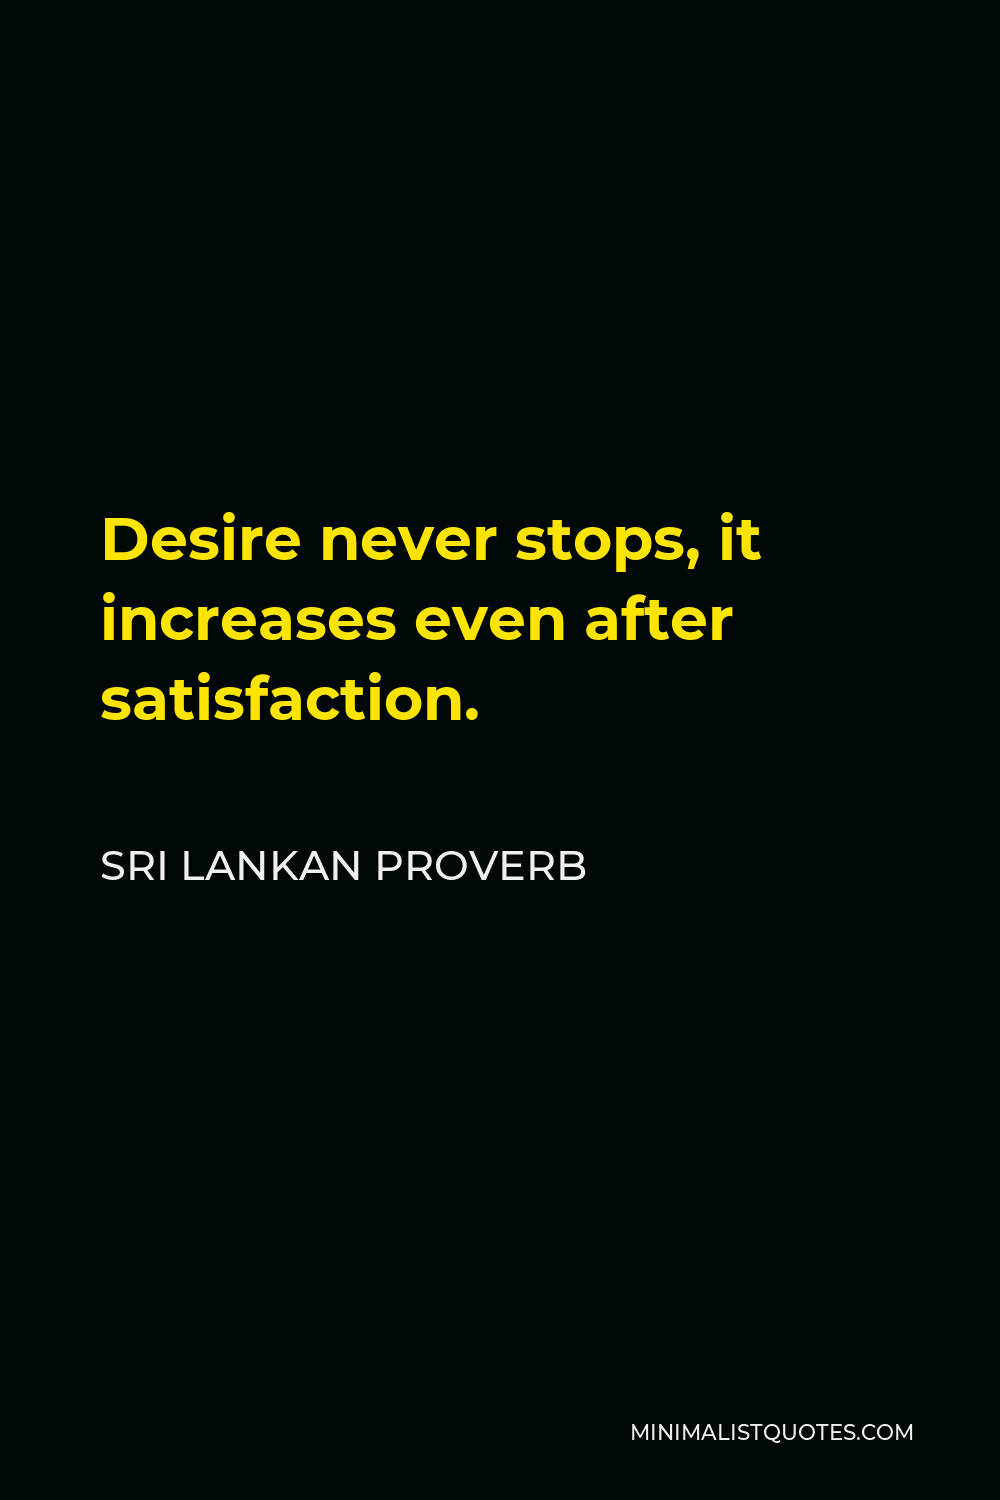 Sri Lankan Proverb Quote - Desire never stops, it increases even after satisfaction.